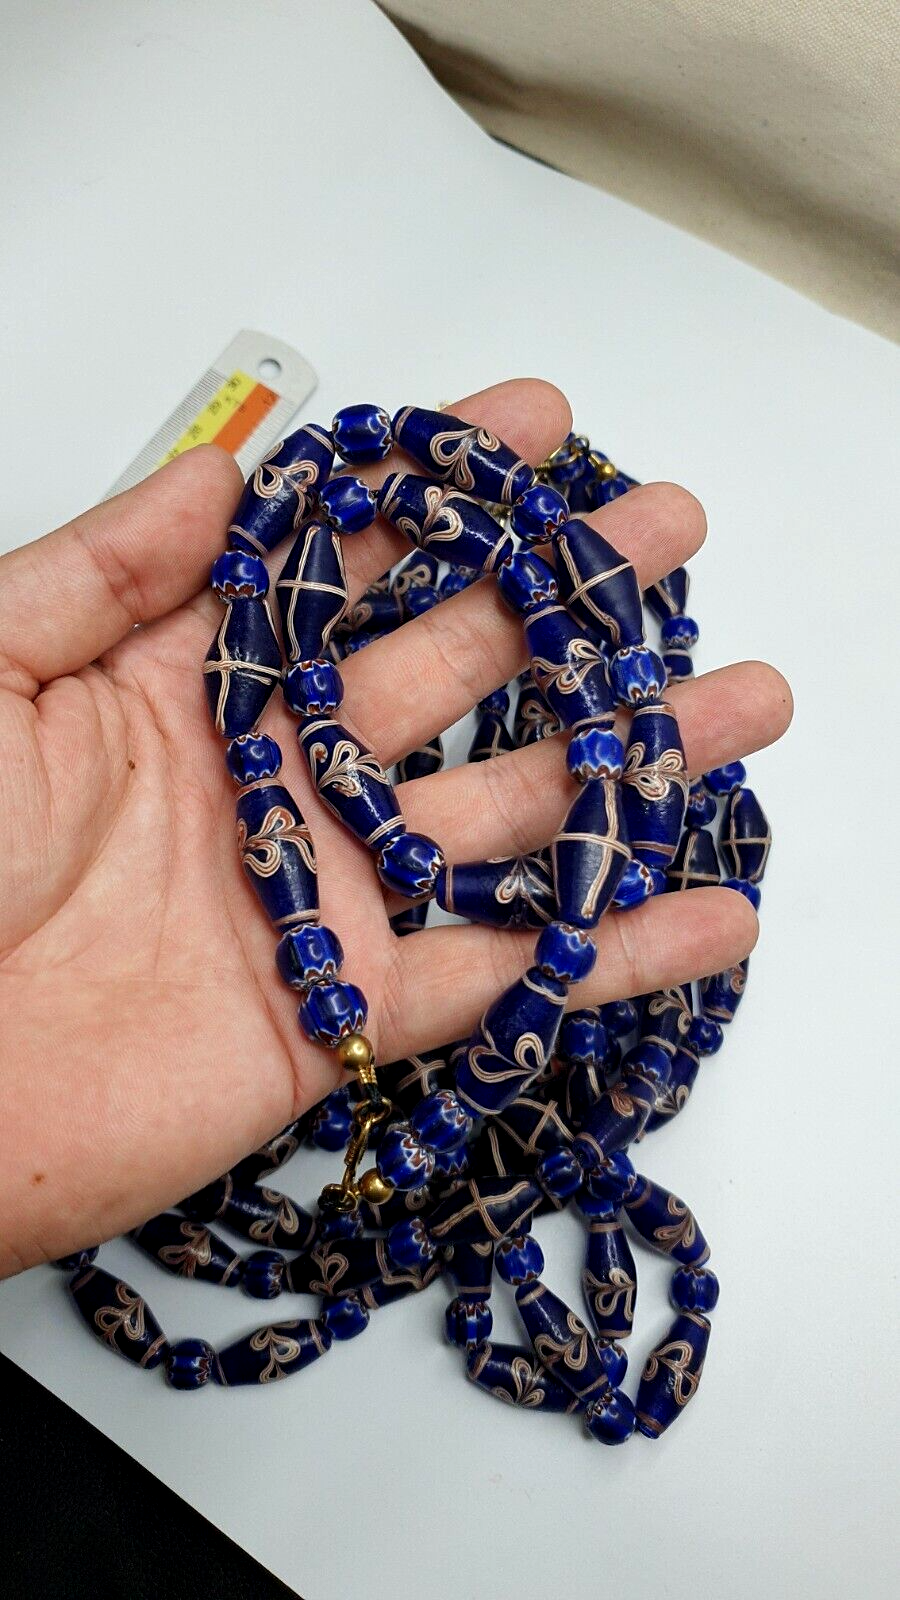 Beautiful Vintage Blue Floral ART Fancy and Chevron GLASS beads necklace